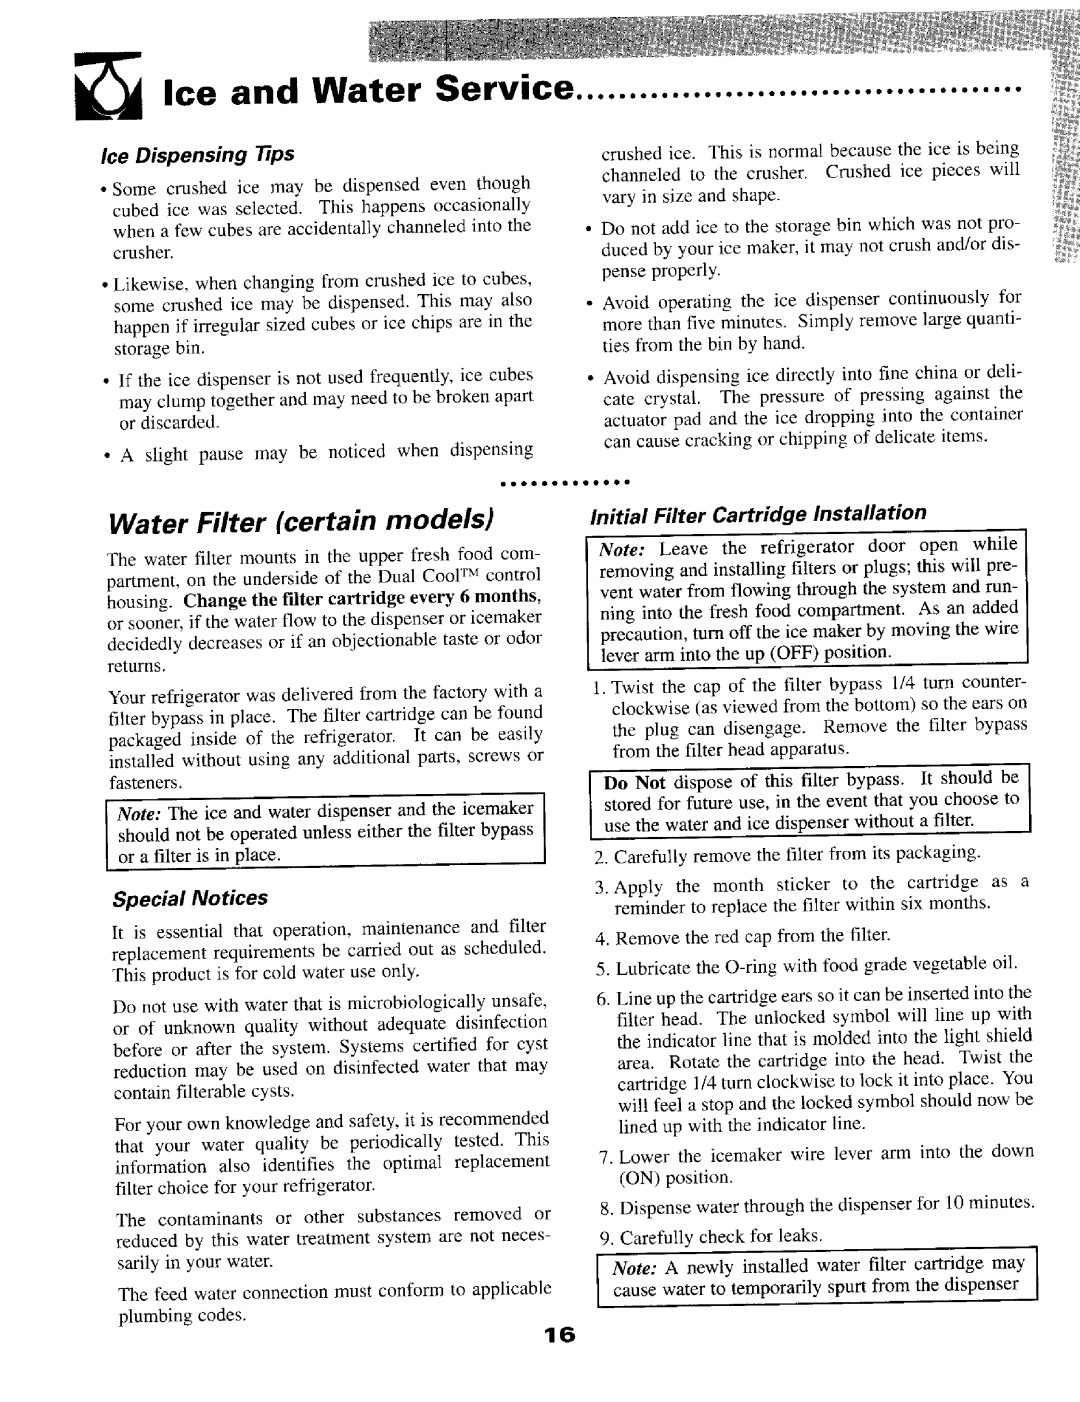 Maytag SS-2 lce and Water Service, Water Filter certain models, InitialFilterCartridge Installation, Ice Dispensing tips 